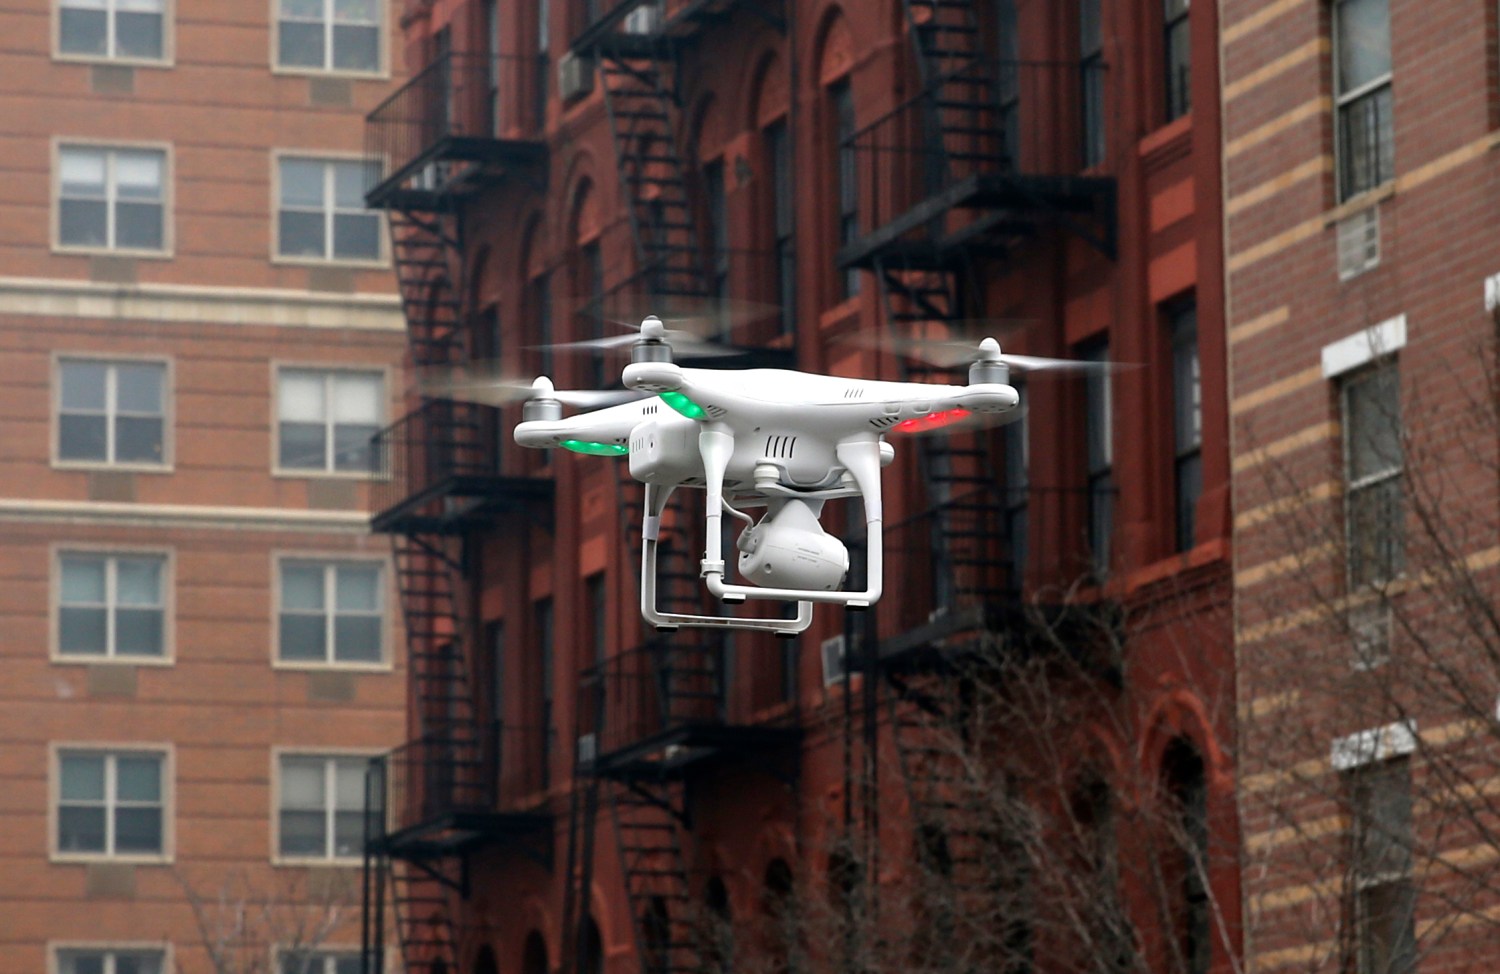 A camera drone flown by Brian Wilson flies near the scene where two buildings were destroyed in an explosion, in the East Harlem section in New York City, March 12, 2014. REUTERS/Mike Segar